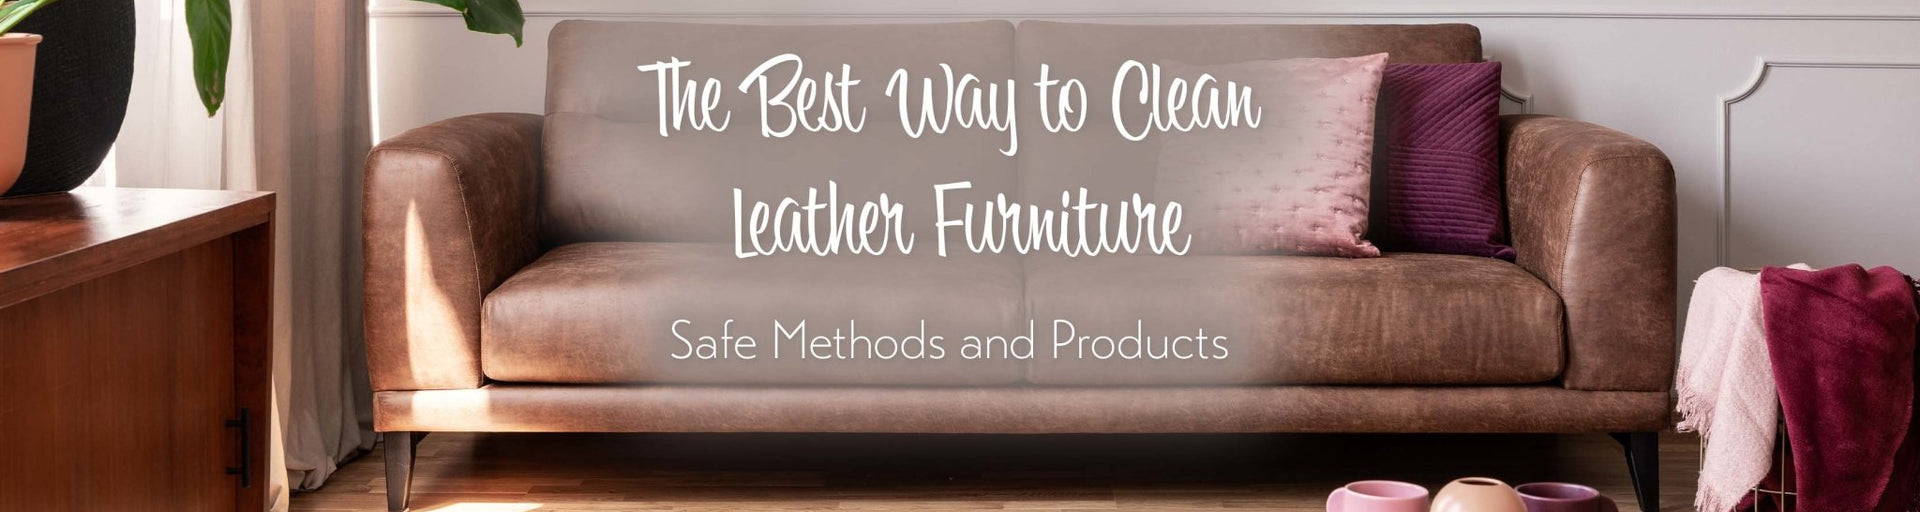 The Best Way To Clean Leather Furniture